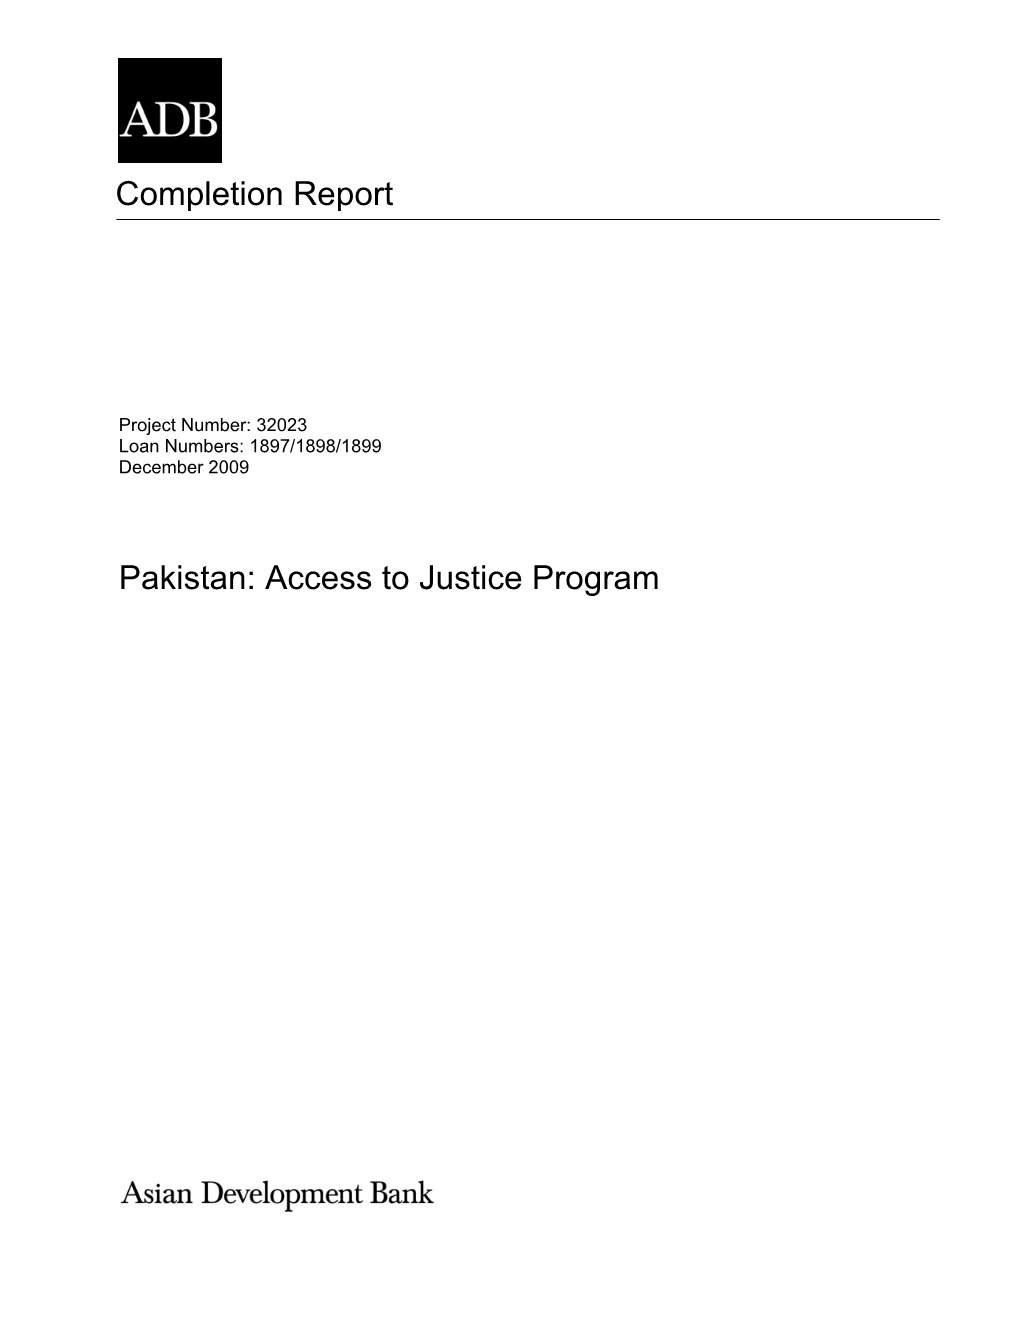 Completion Report Pakistan: Access to Justice Program